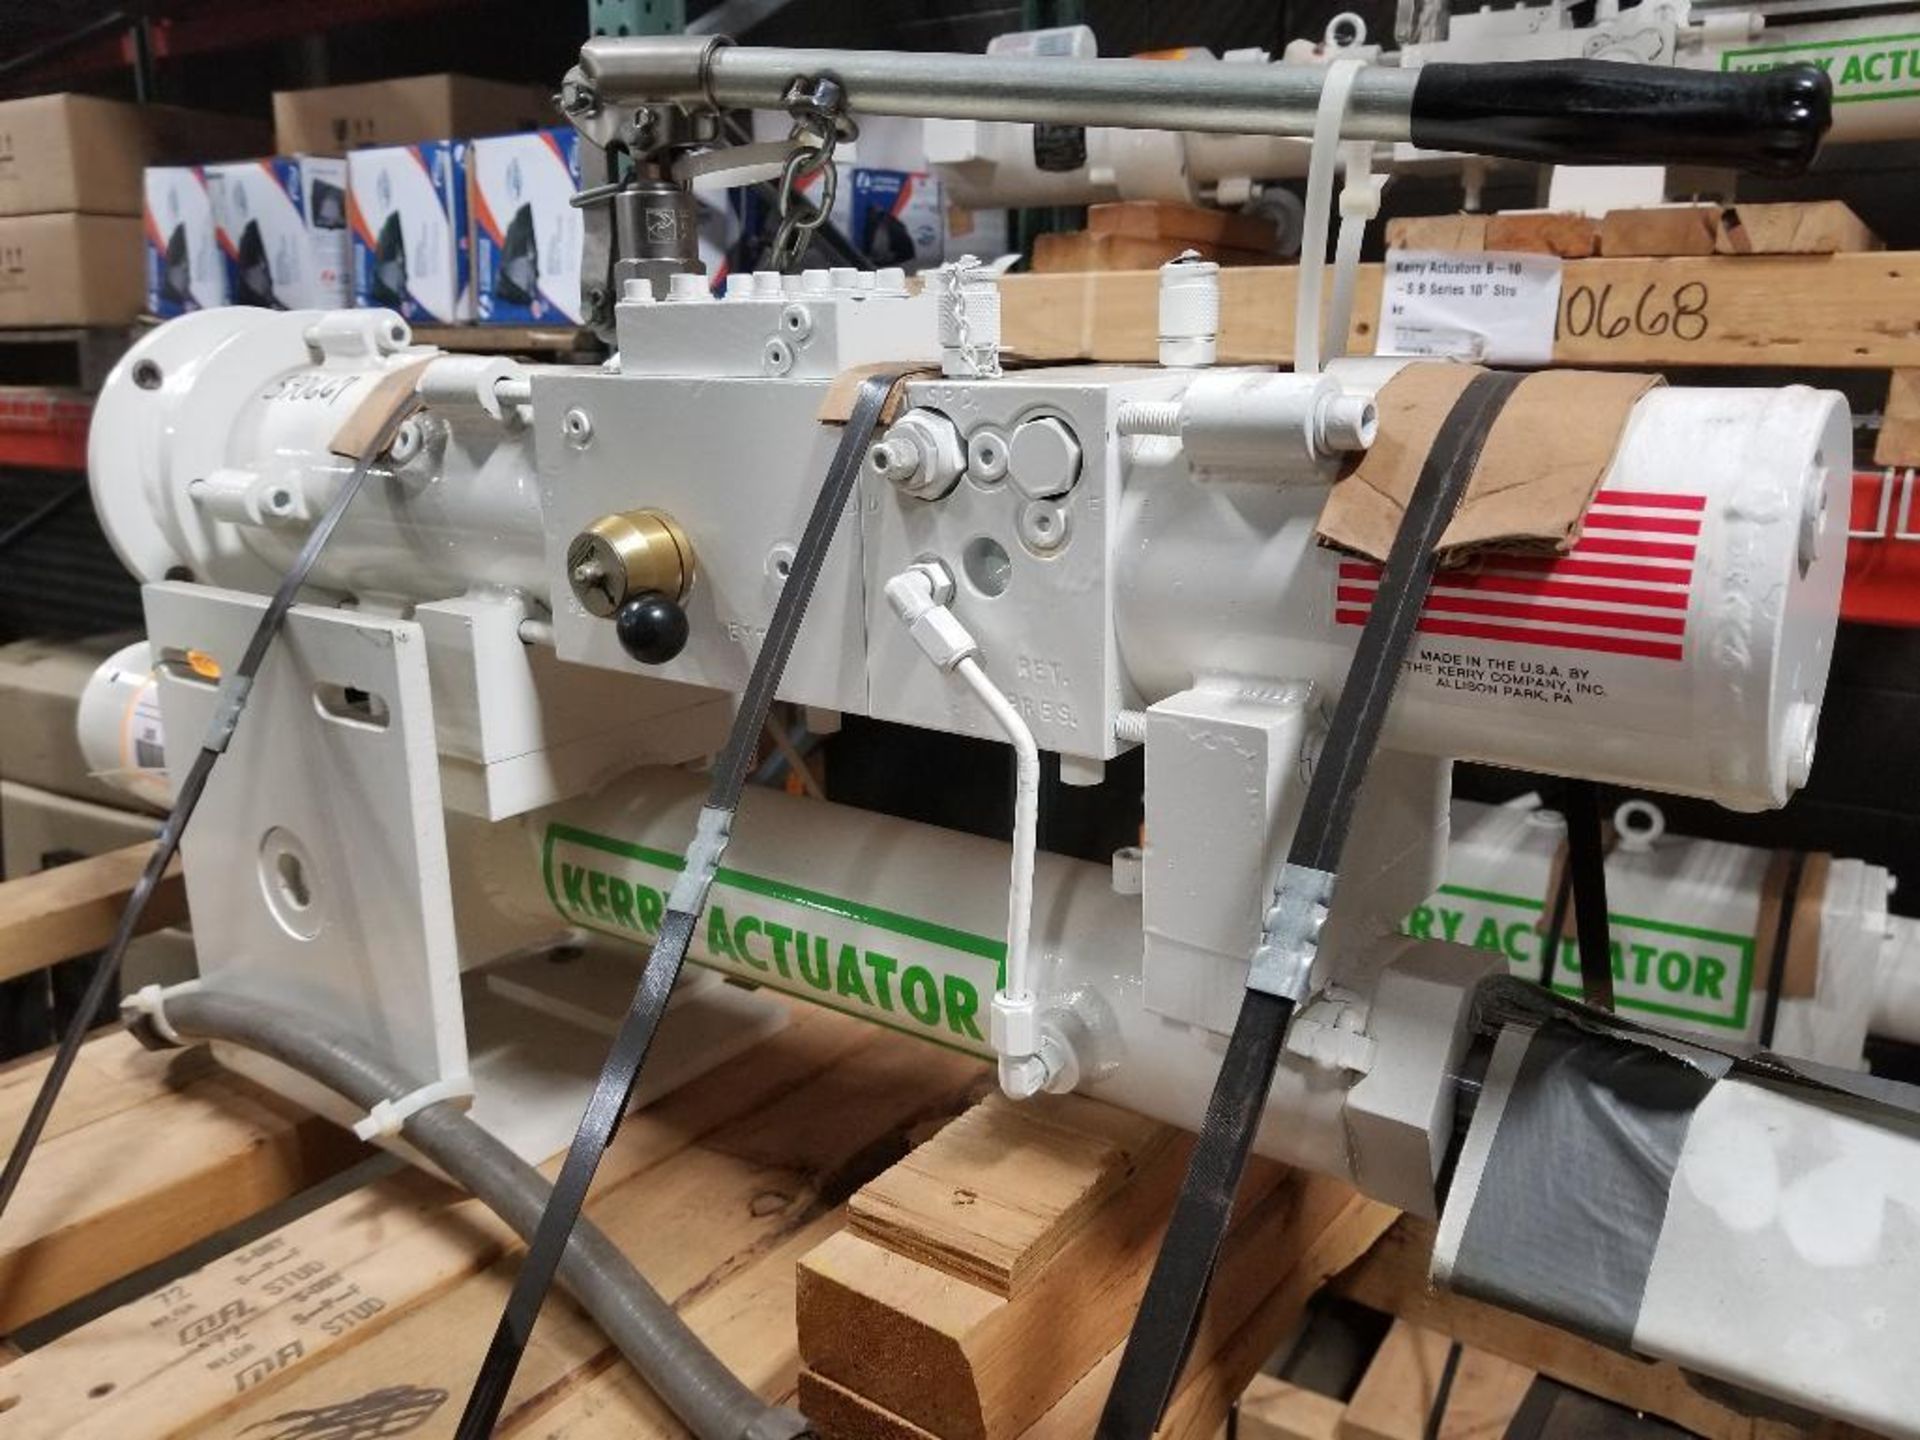 Kerry Actuator. New on pallet. - Image 6 of 8